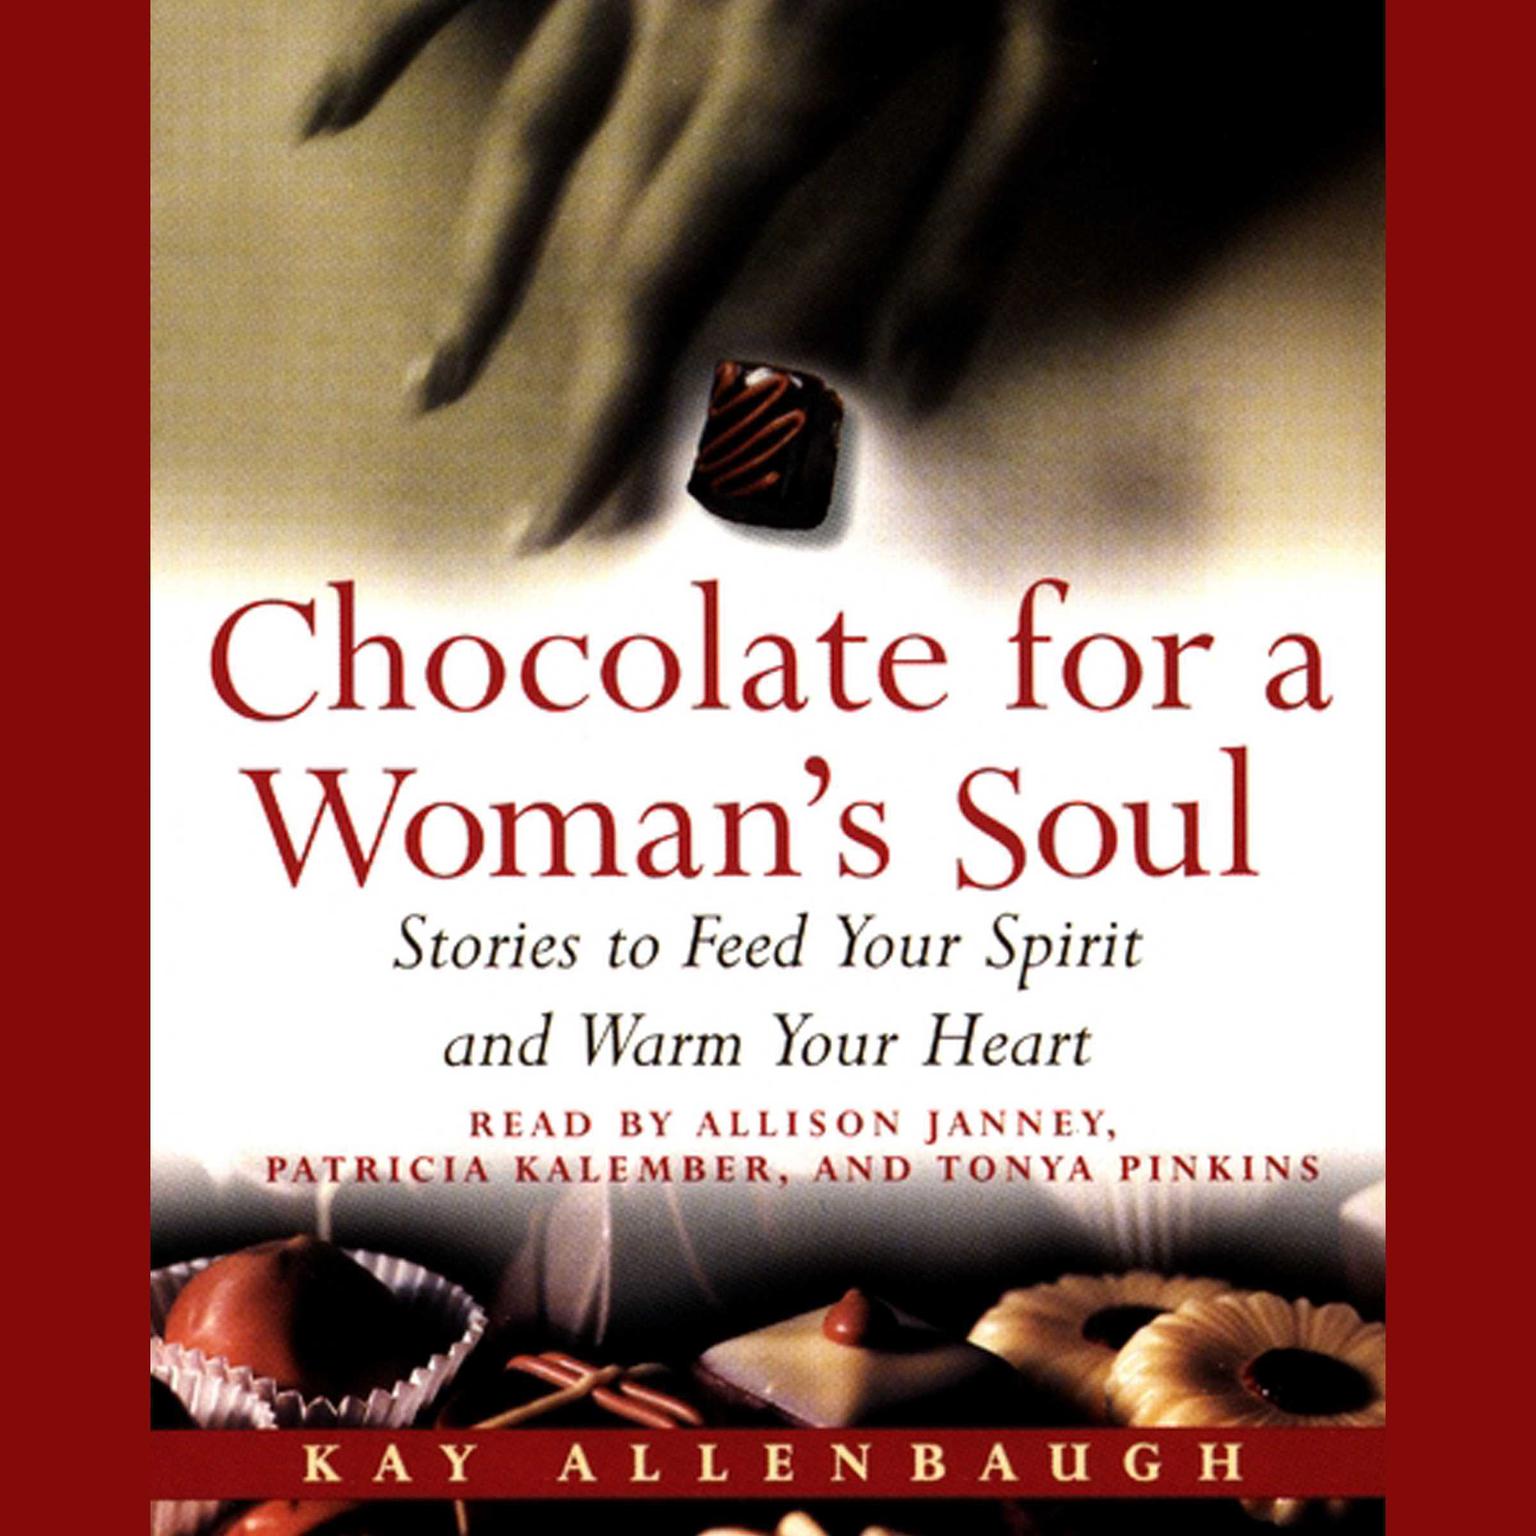 Chocolate for a Woman’s Soul (Abridged): Stories to Feed Your Spirit and Warm Your Heart Audiobook, by Kay Allenbaugh